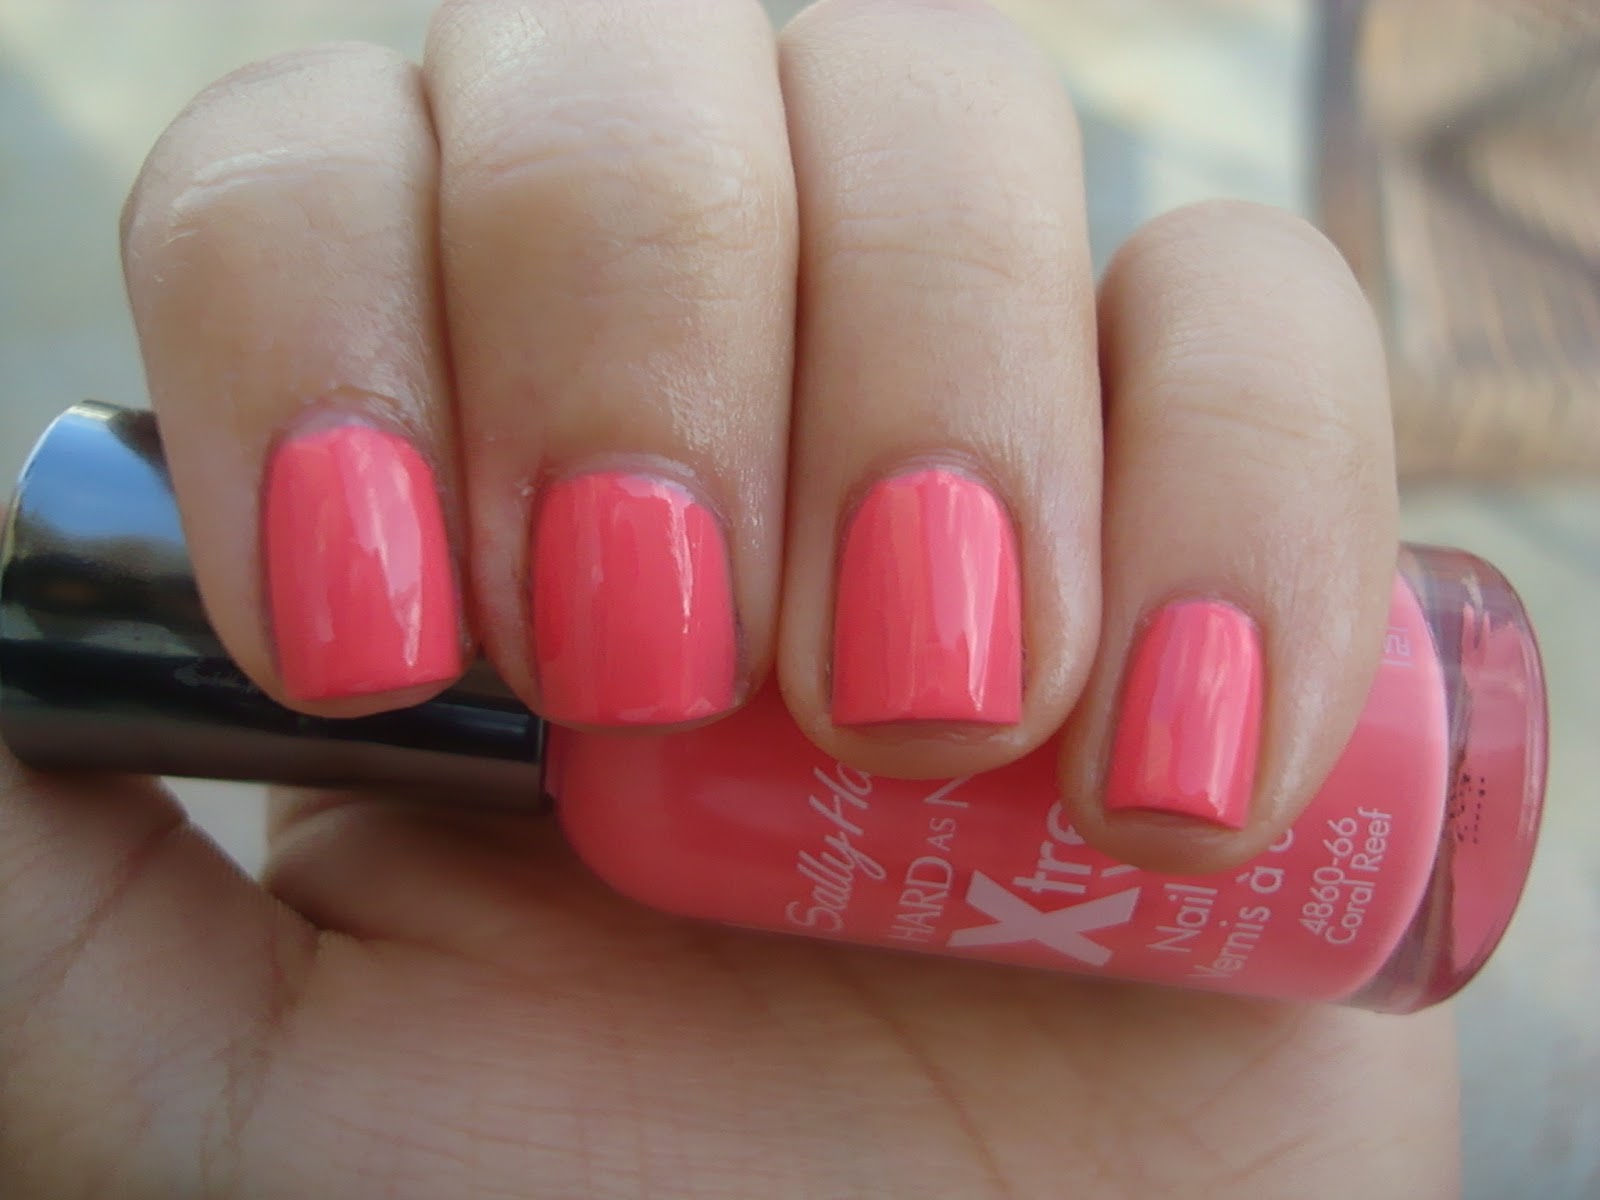 6. Sally Hansen Hard as Nails Xtreme Wear Nail Color, Coral Reef - wide 1